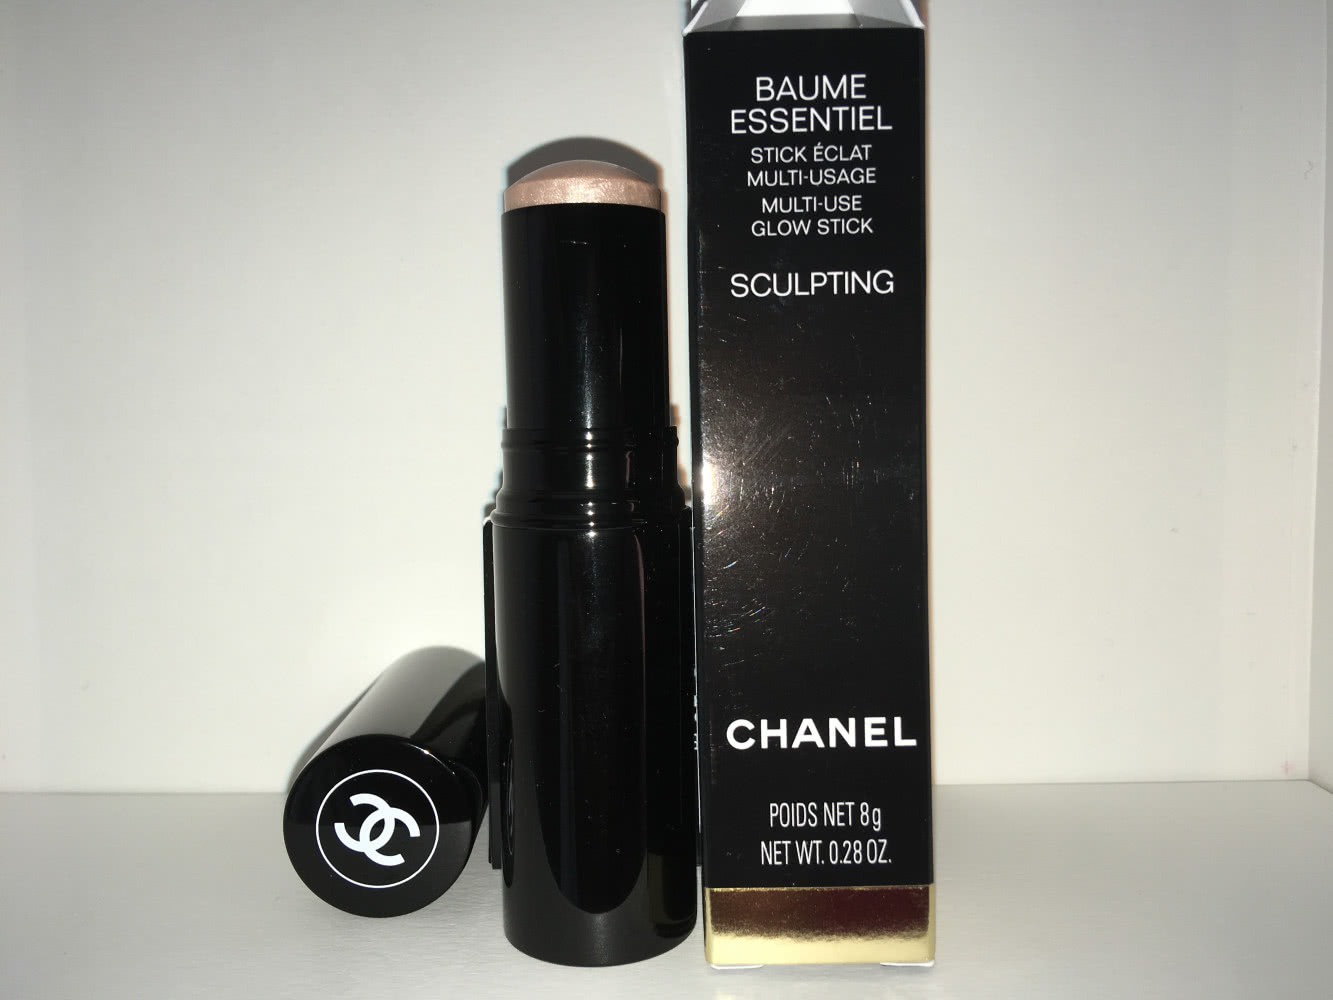 BAUME ESSENTIEL Multi-Use Glow Stick by CHANEL at ORCHARD MILE